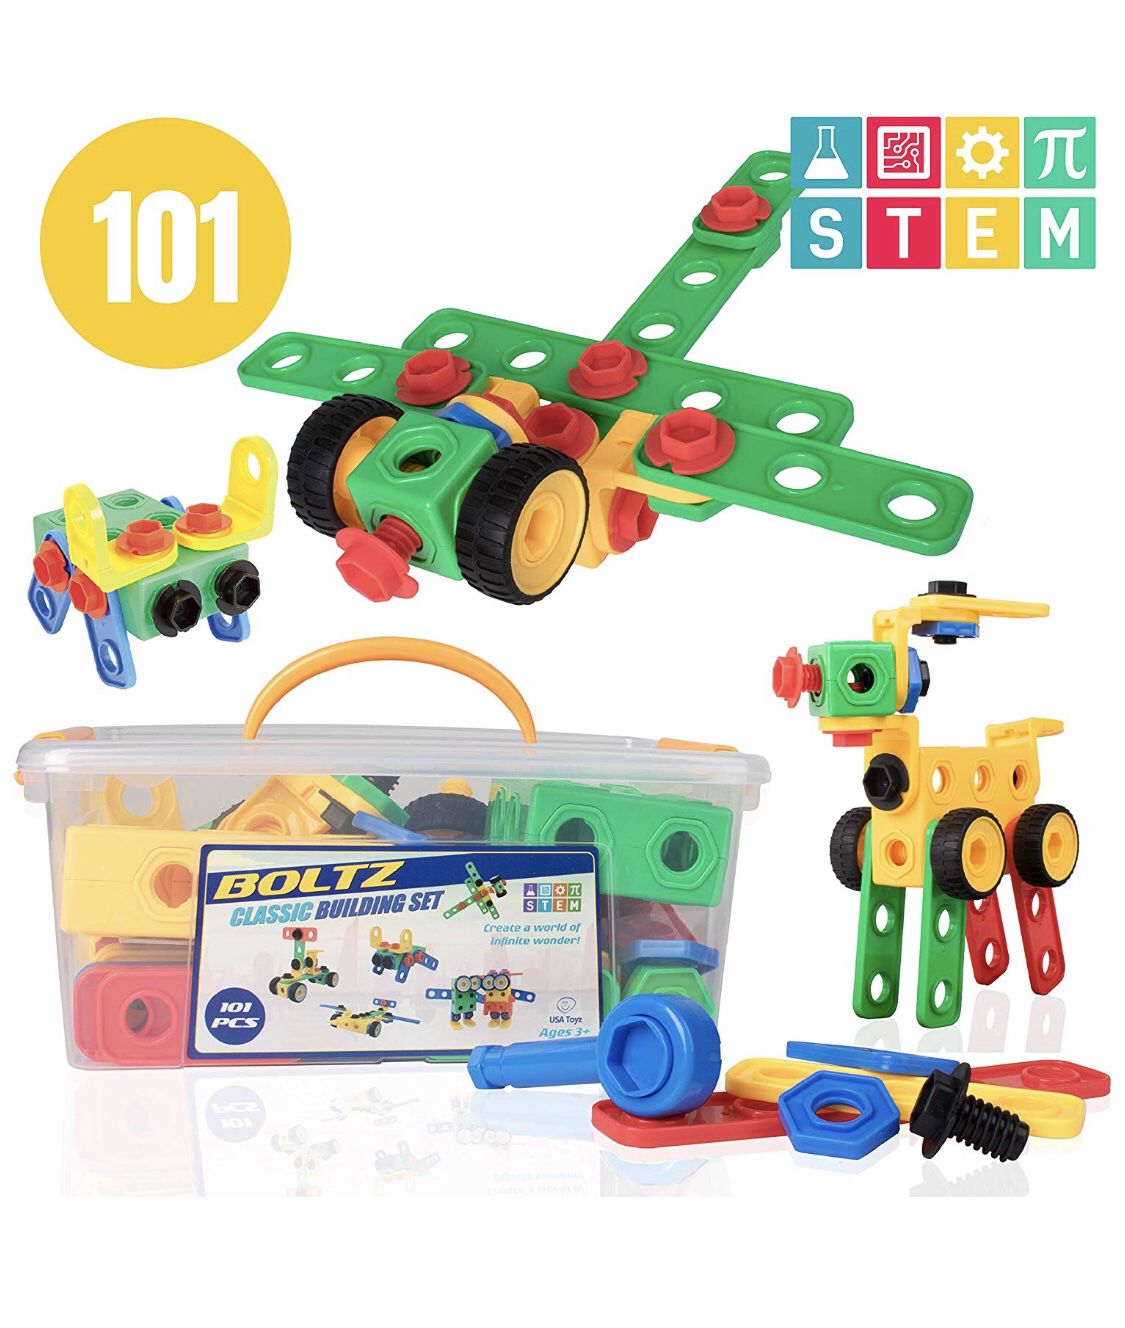 USA Toyz STEM Building Toys for Kids – 101pk Educational Learning STEAM Building Games, Engineering Construction Gears, Boys Girls Ages 3 4 5 6 7 8 9